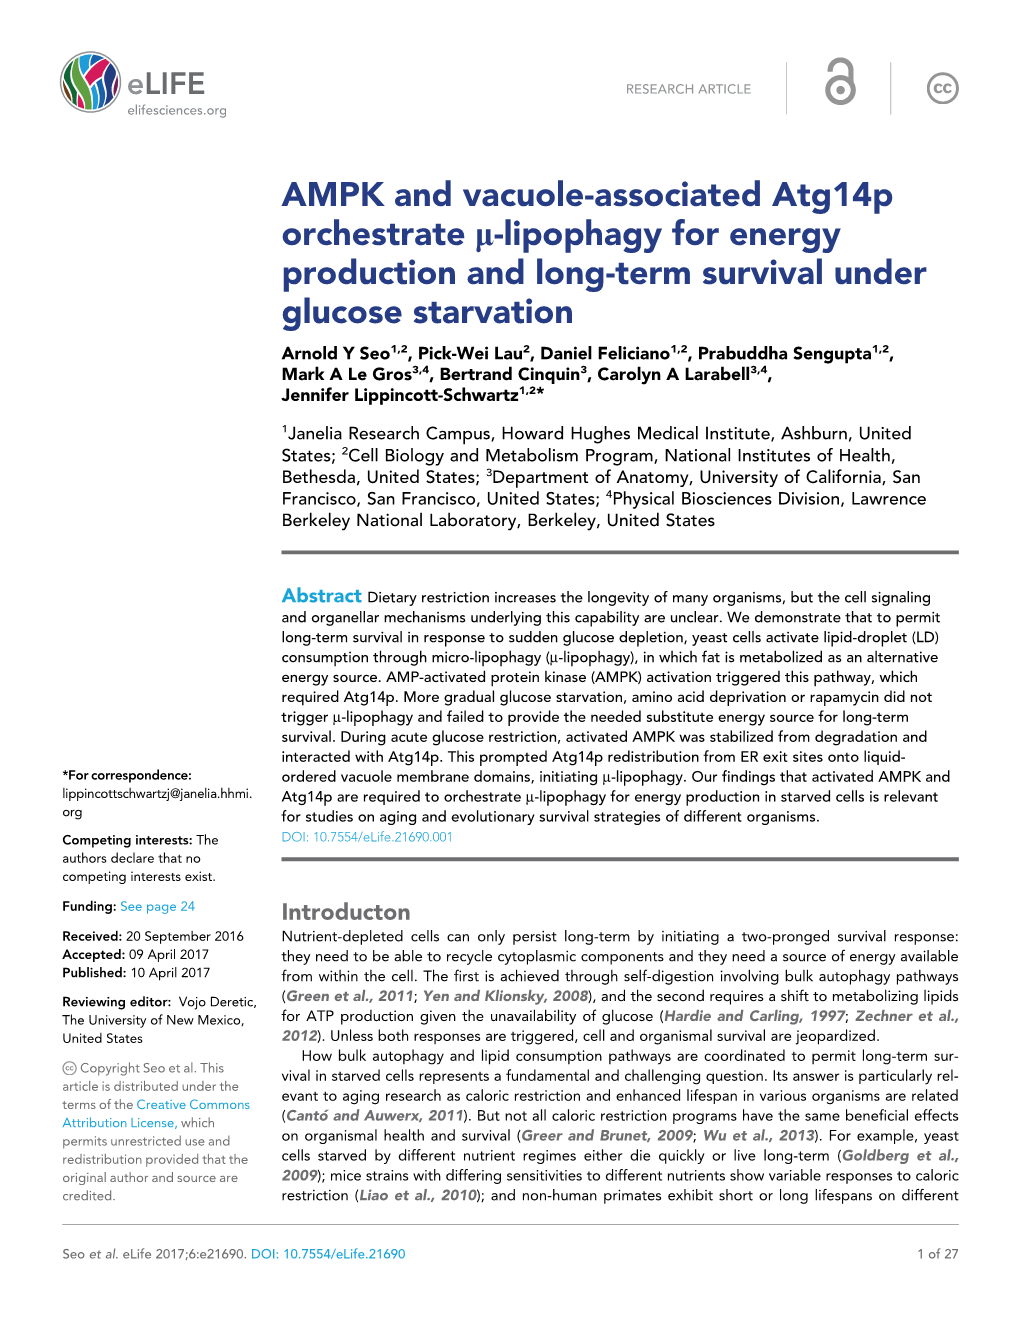 AMPK and Vacuole-Associated Atg14p Orchestrate M-Lipophagy for Energy